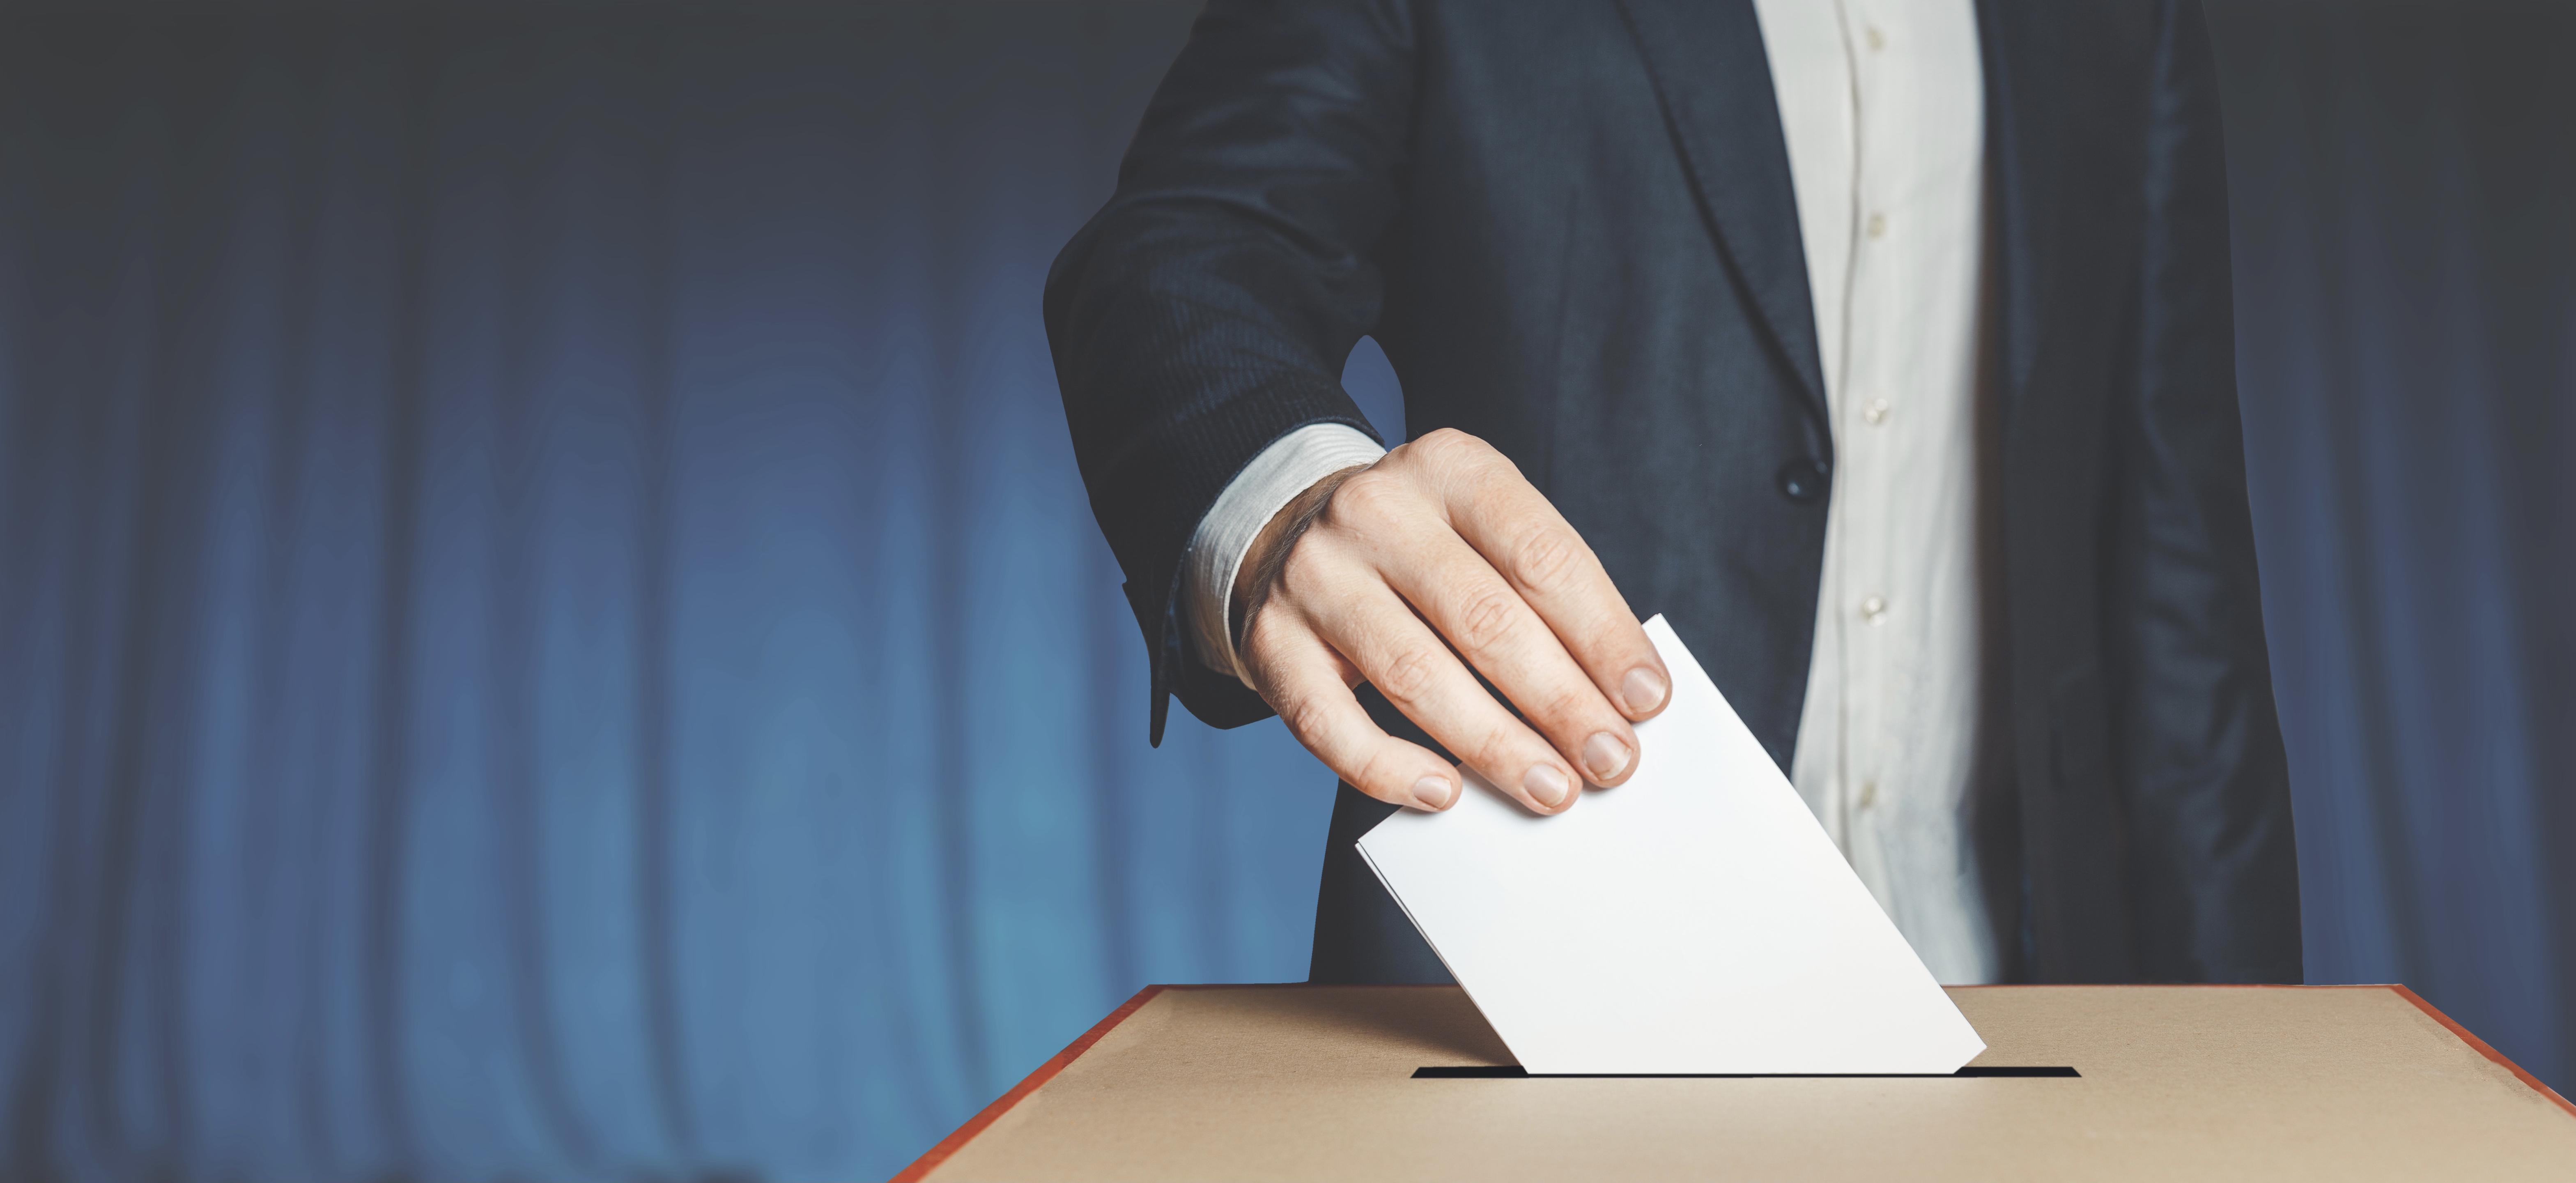 image shows a person's hand inserting a voting ballot into a box